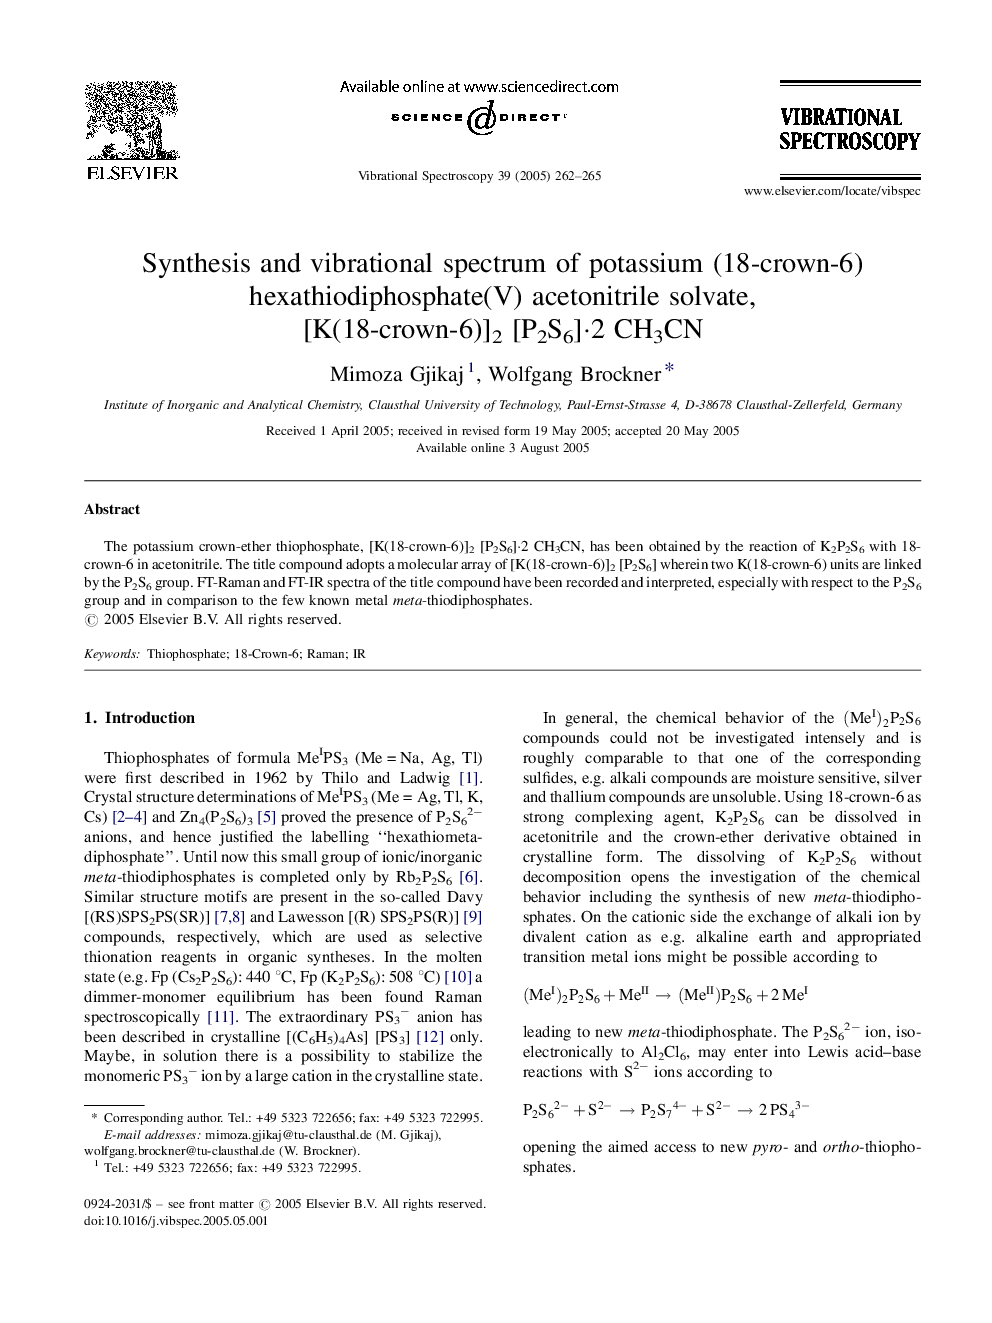 Synthesis and vibrational spectrum of potassium (18-crown-6) hexathiodiphosphate(V) acetonitrile solvate, [K(18-crown-6)]2 [P2S6]Â·2 CH3CN